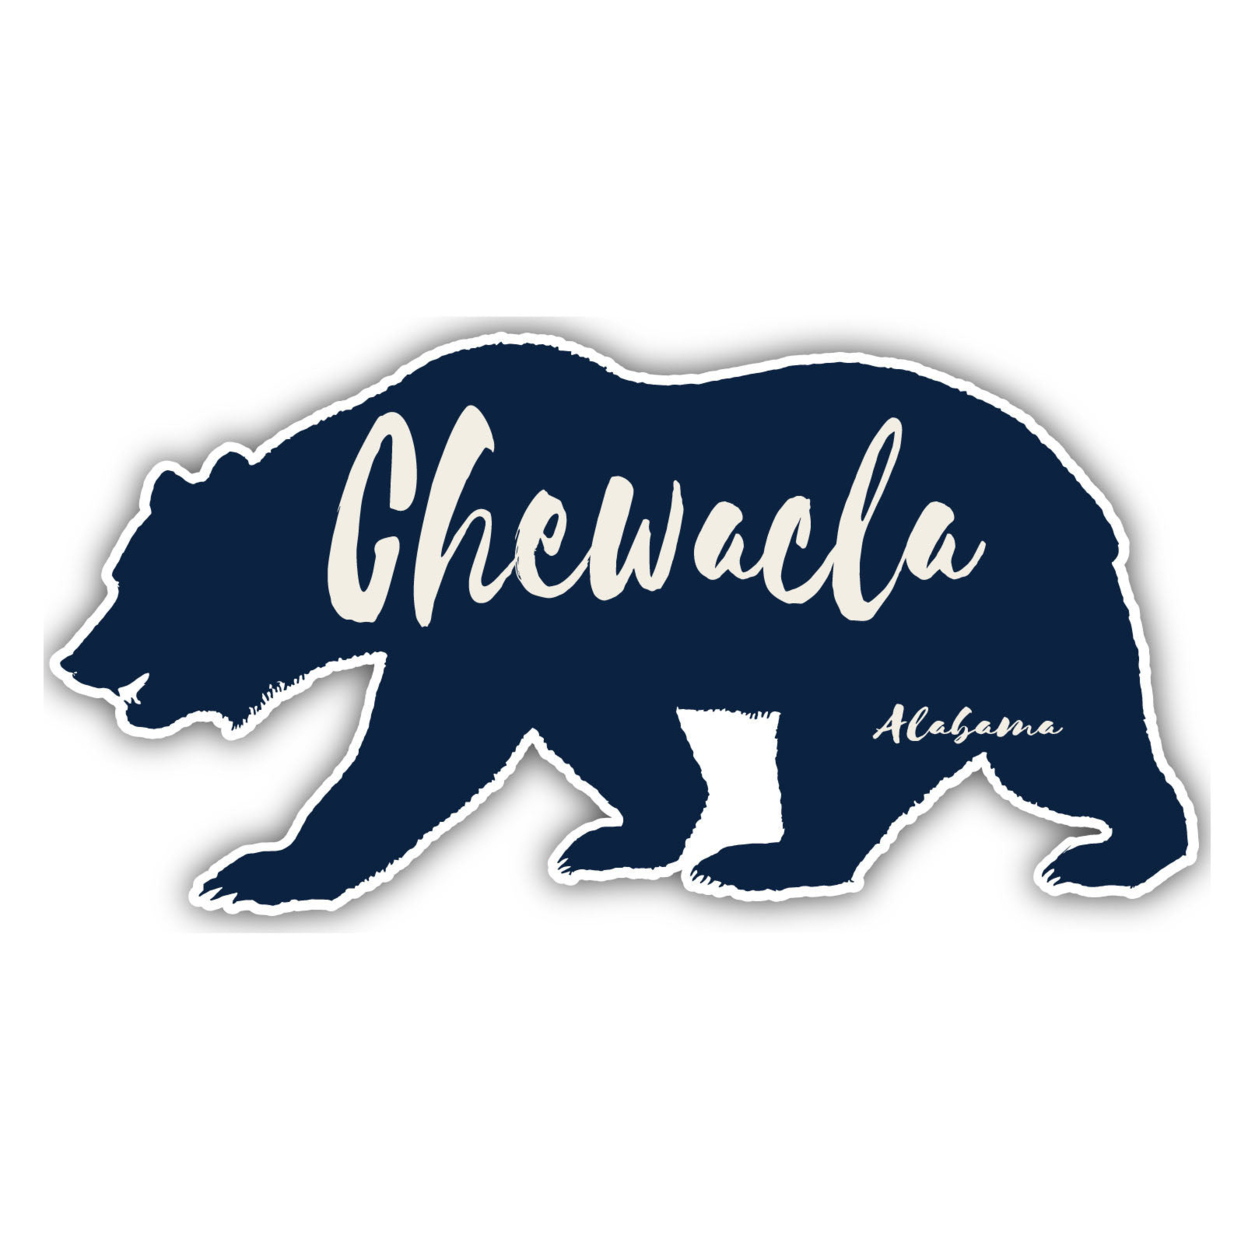 Chewacla Alabama Souvenir Decorative Stickers (Choose Theme And Size) - 4-Pack, 8-Inch, Bear